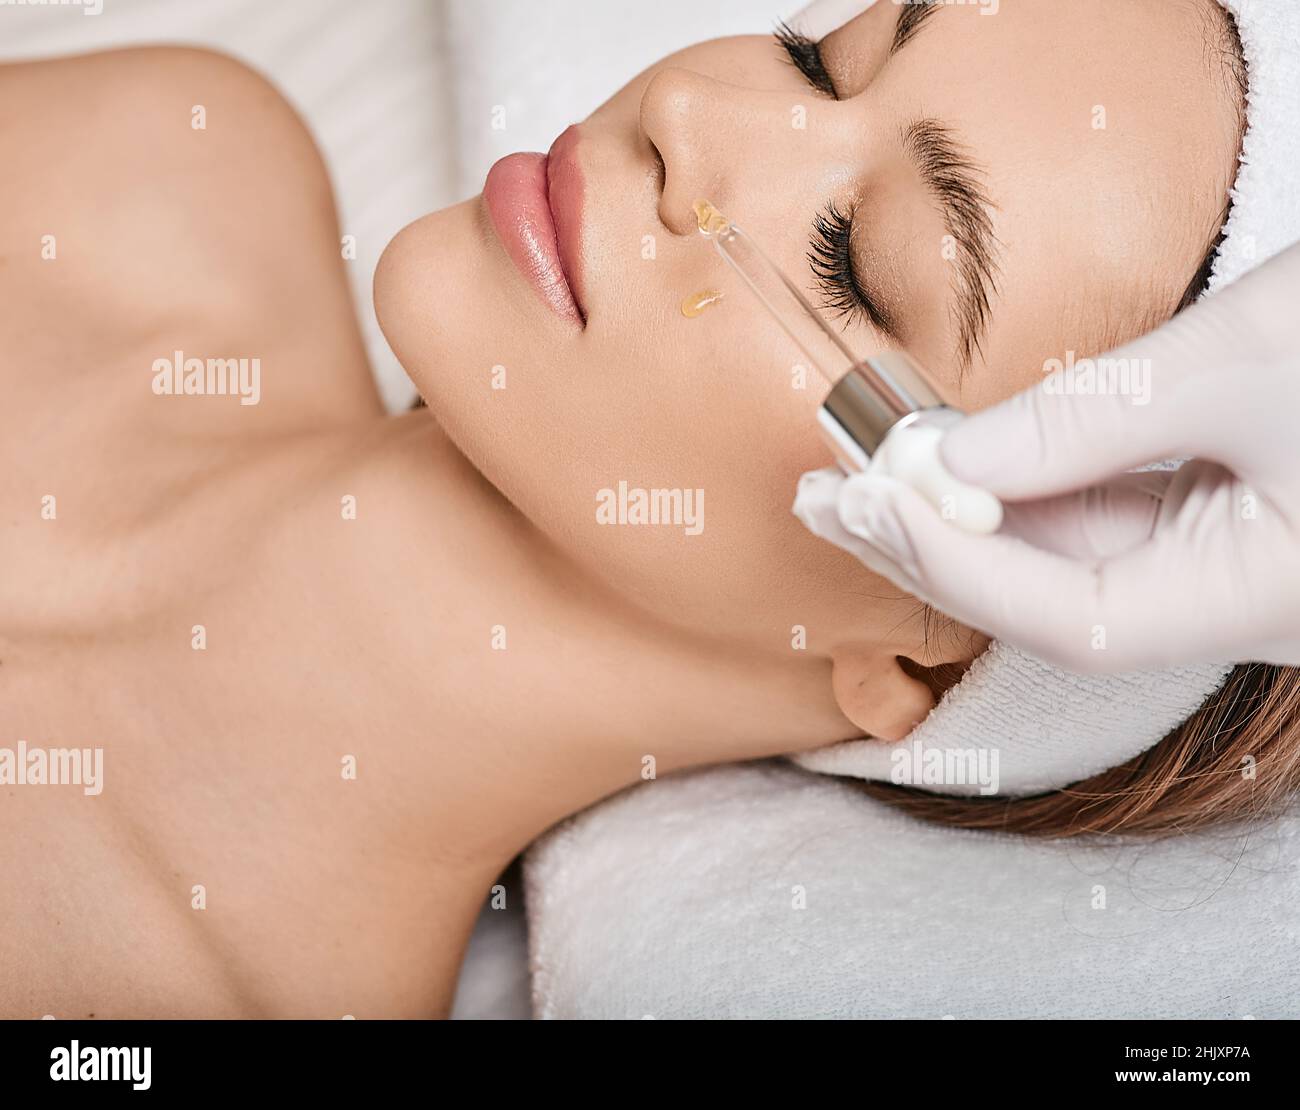 Female patient with closed eyes enjoying cosmetology procedures using treatments oils and serum to facial skin care Stock Photo